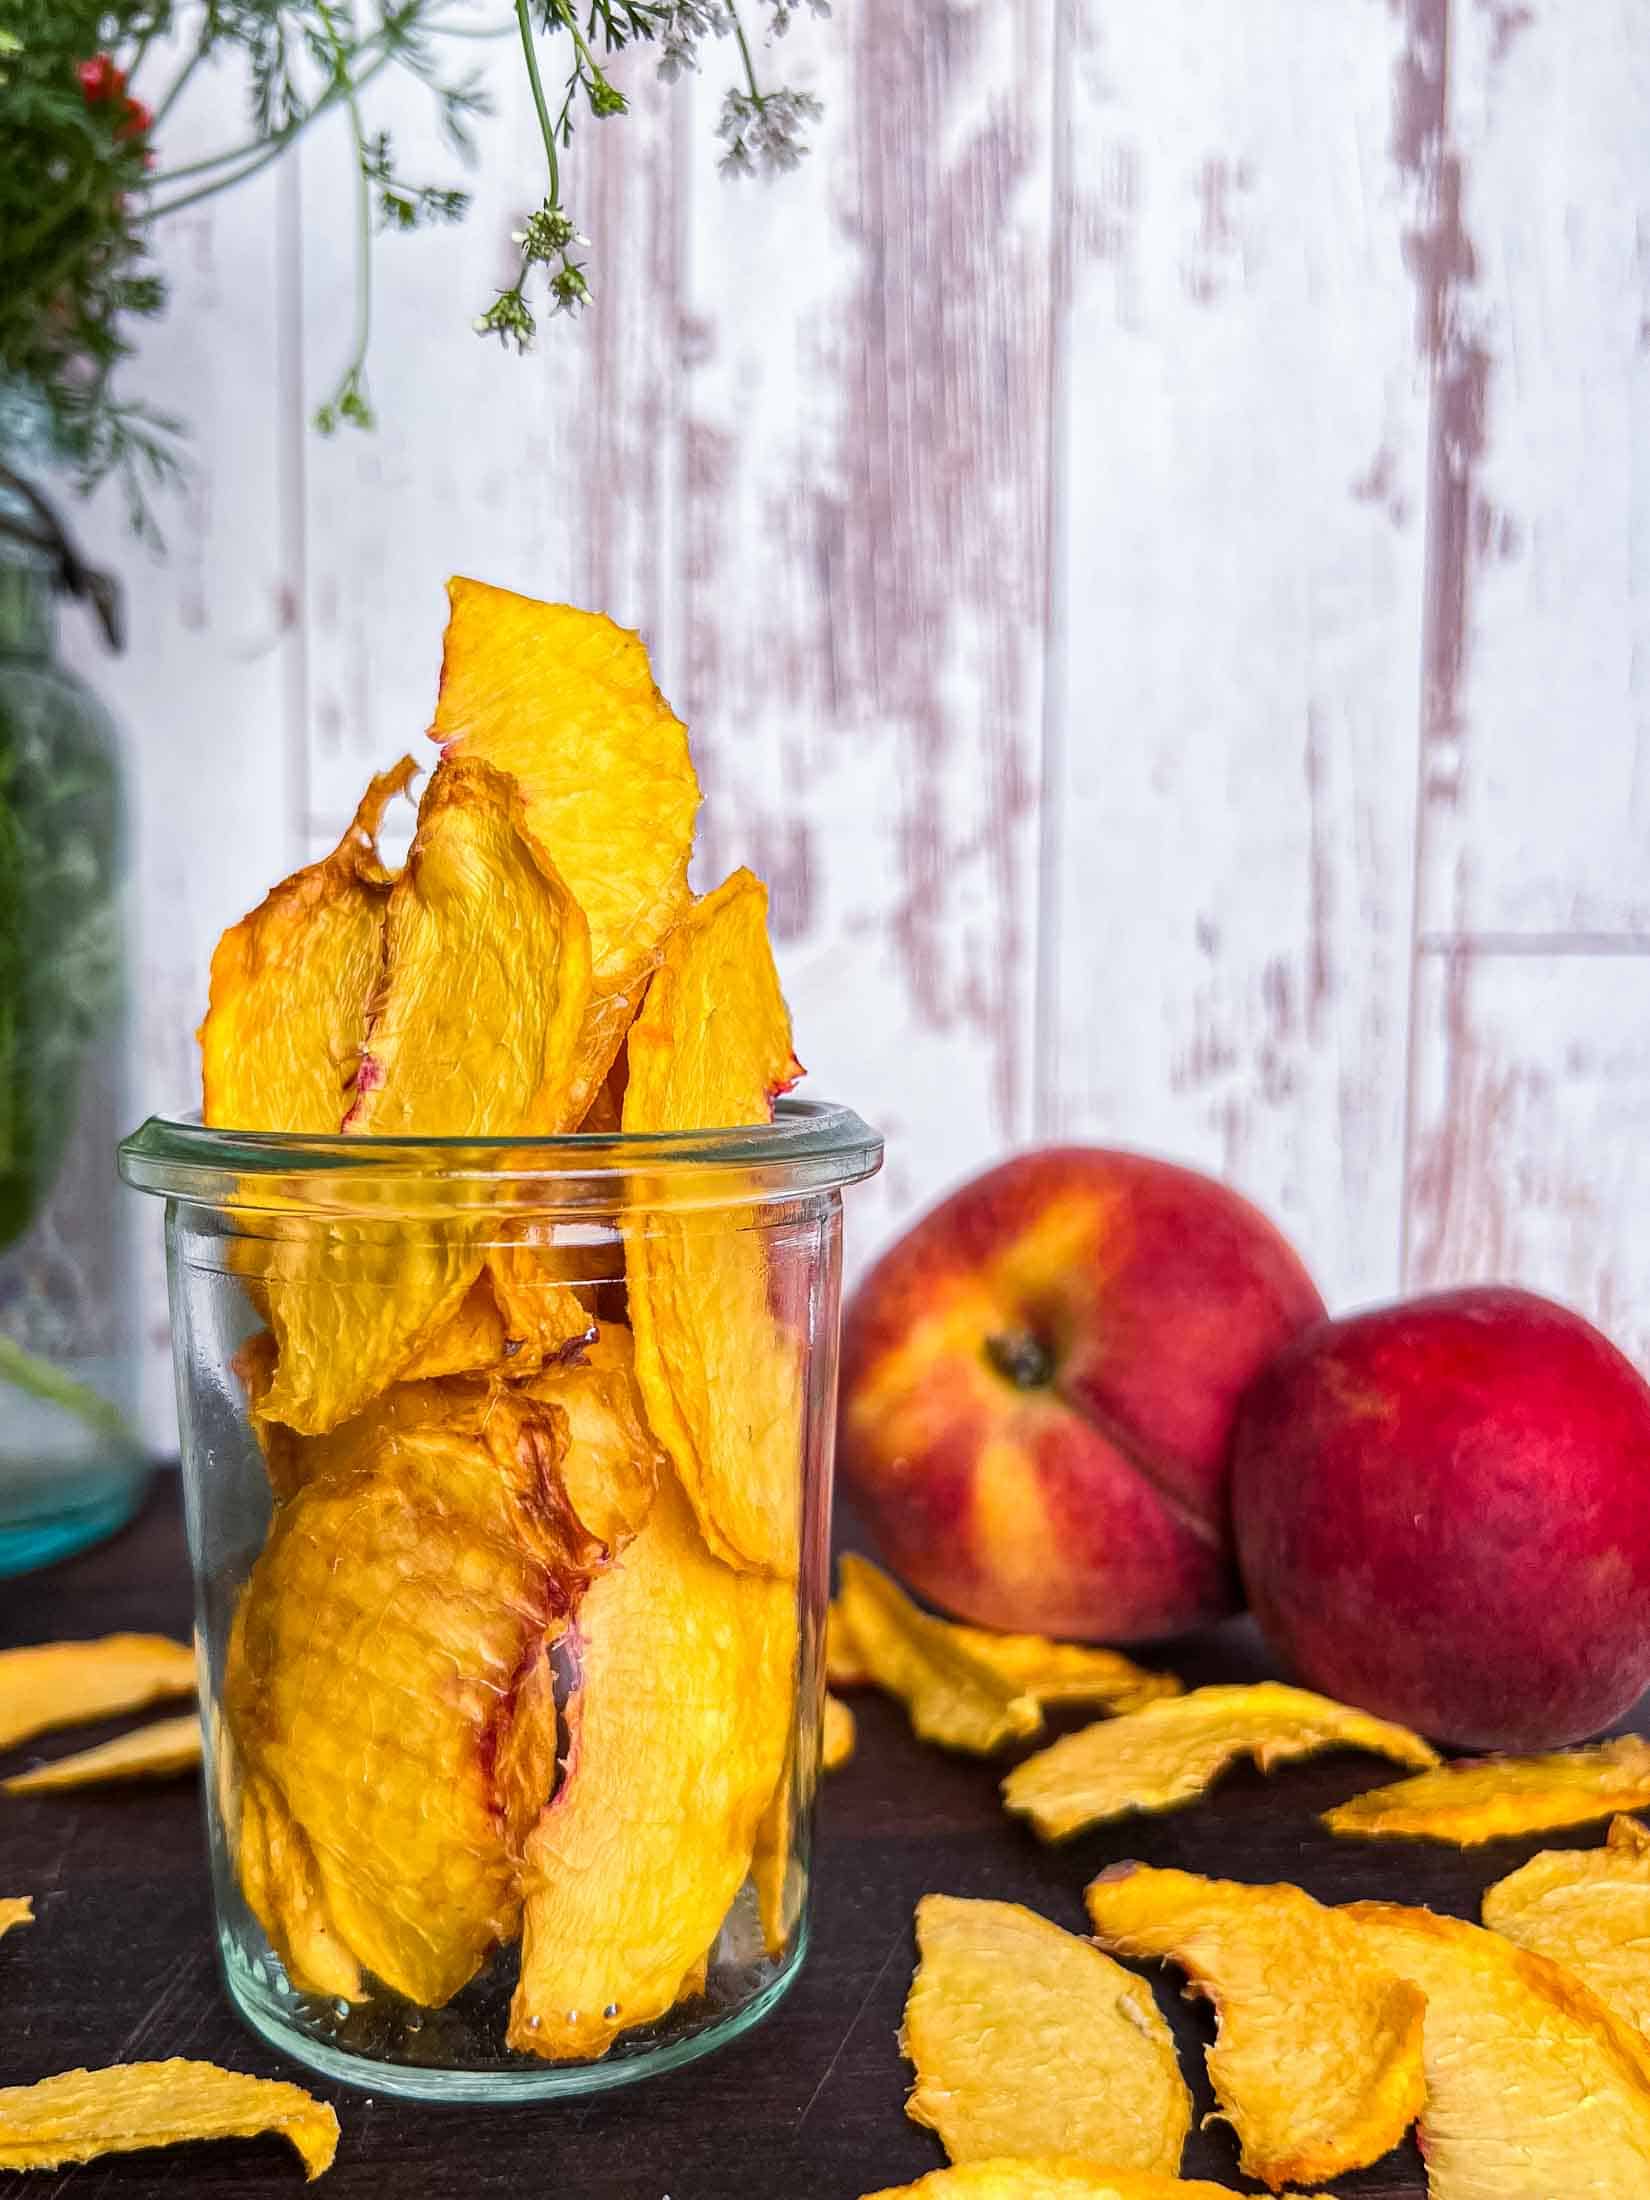 Dehydrated peaches in a glass weck jar with fresh and dried peaches in the foreground.